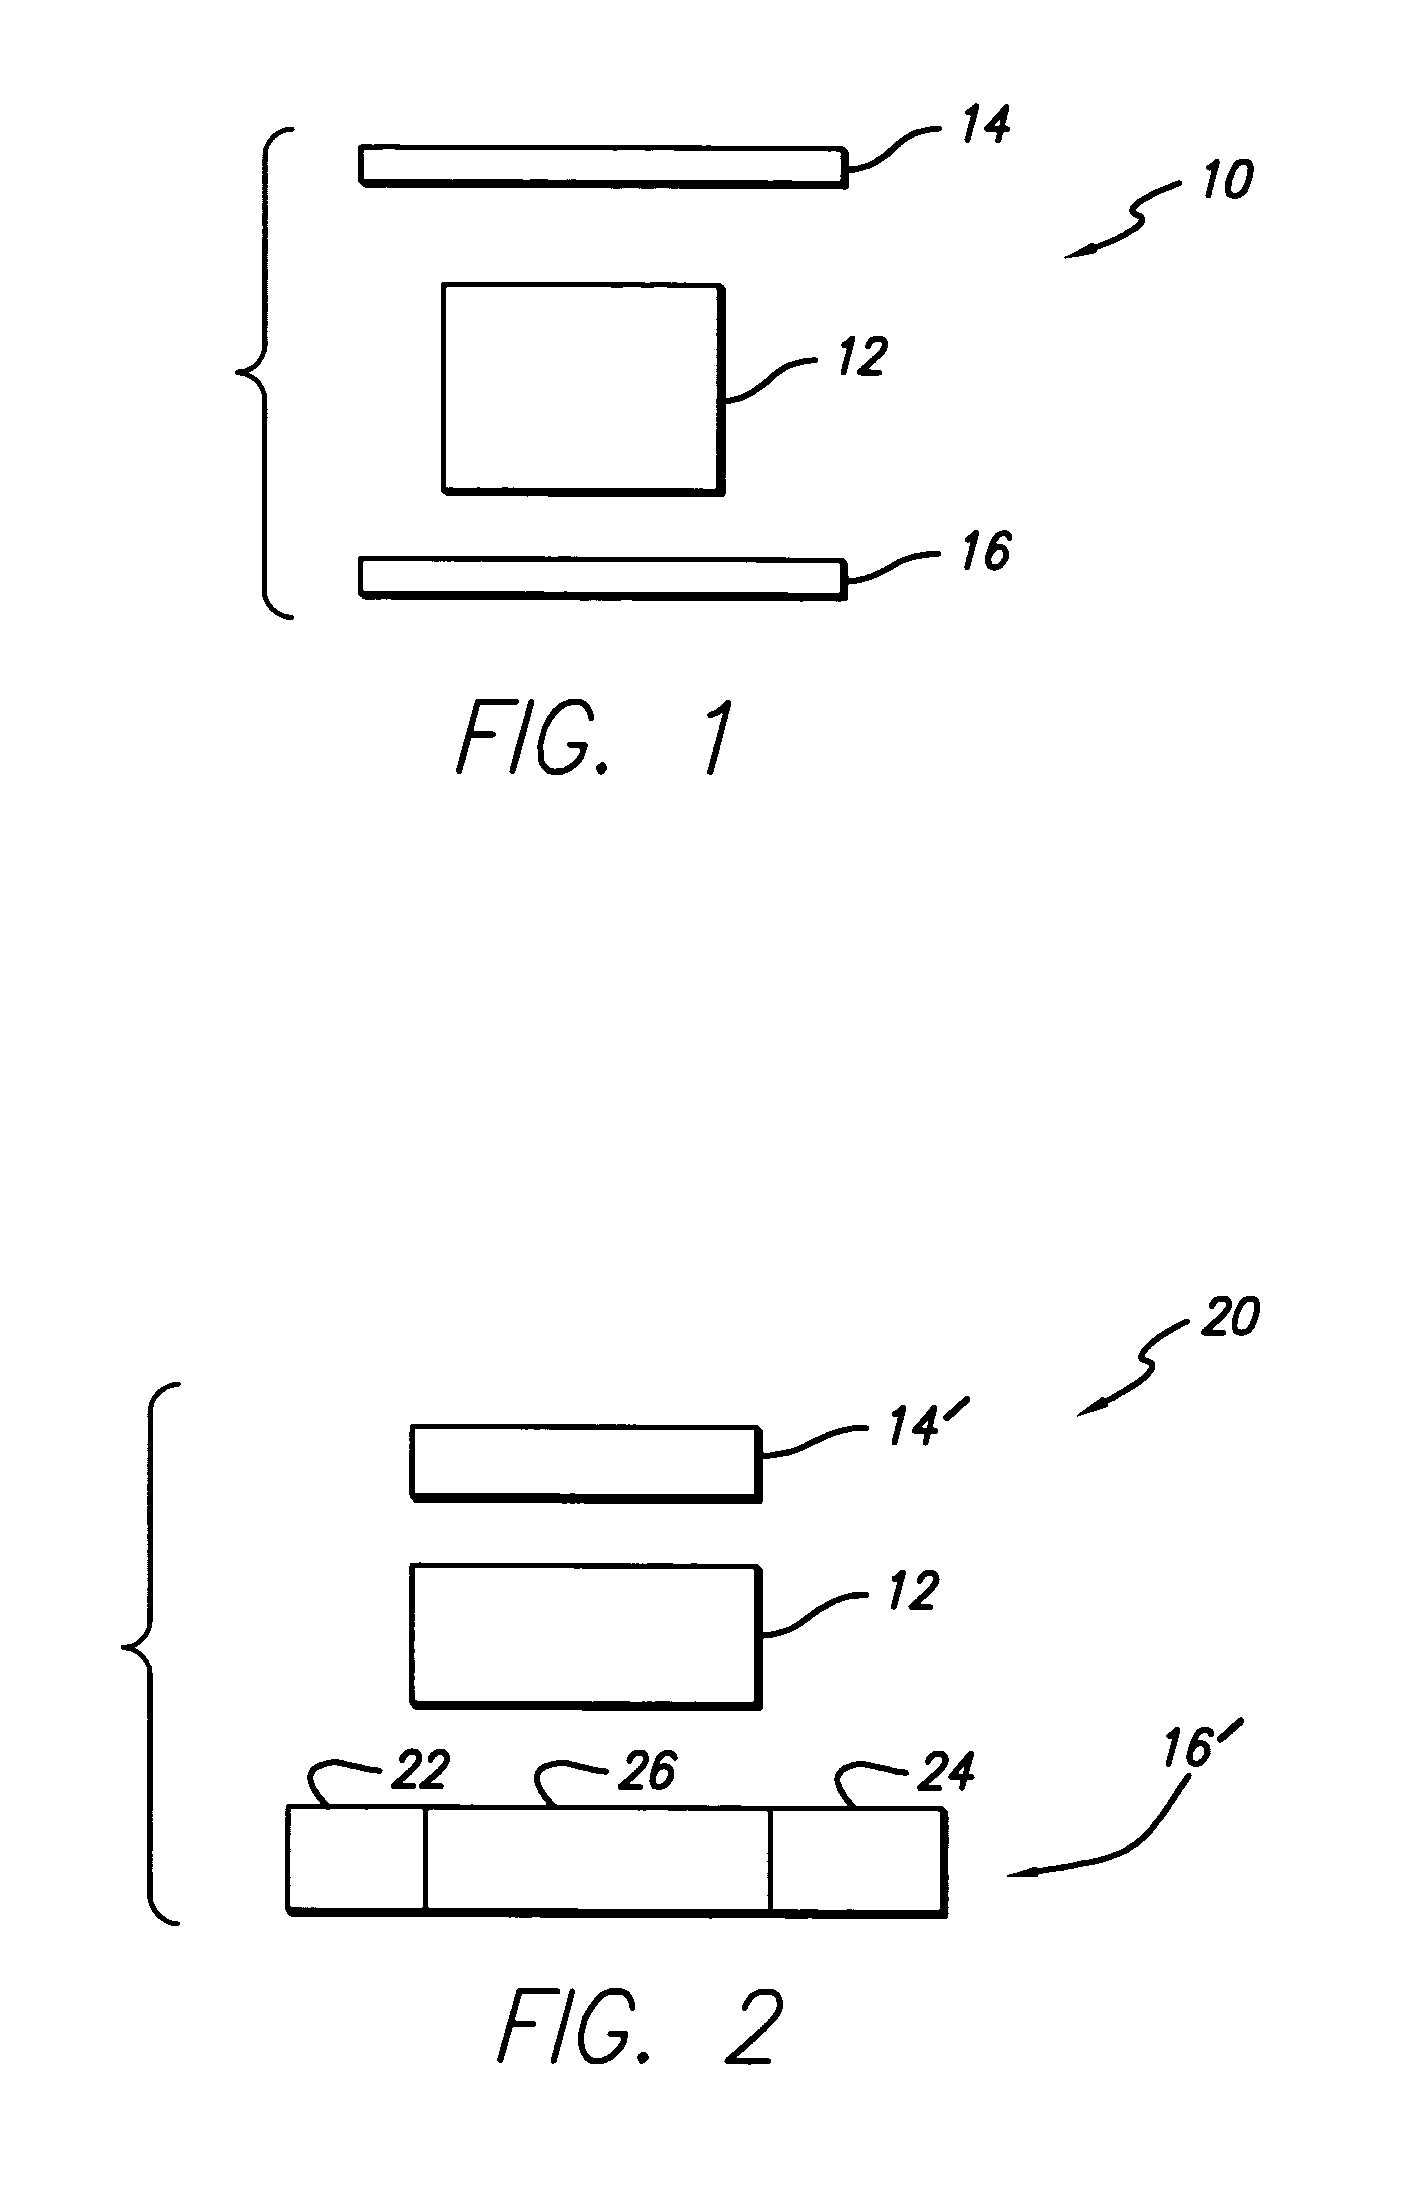 Composition of matter which results in electronic switching through intra- or inter- molecular charge transfer, or charge transfer between molecules and electrodes induced by an electrical field